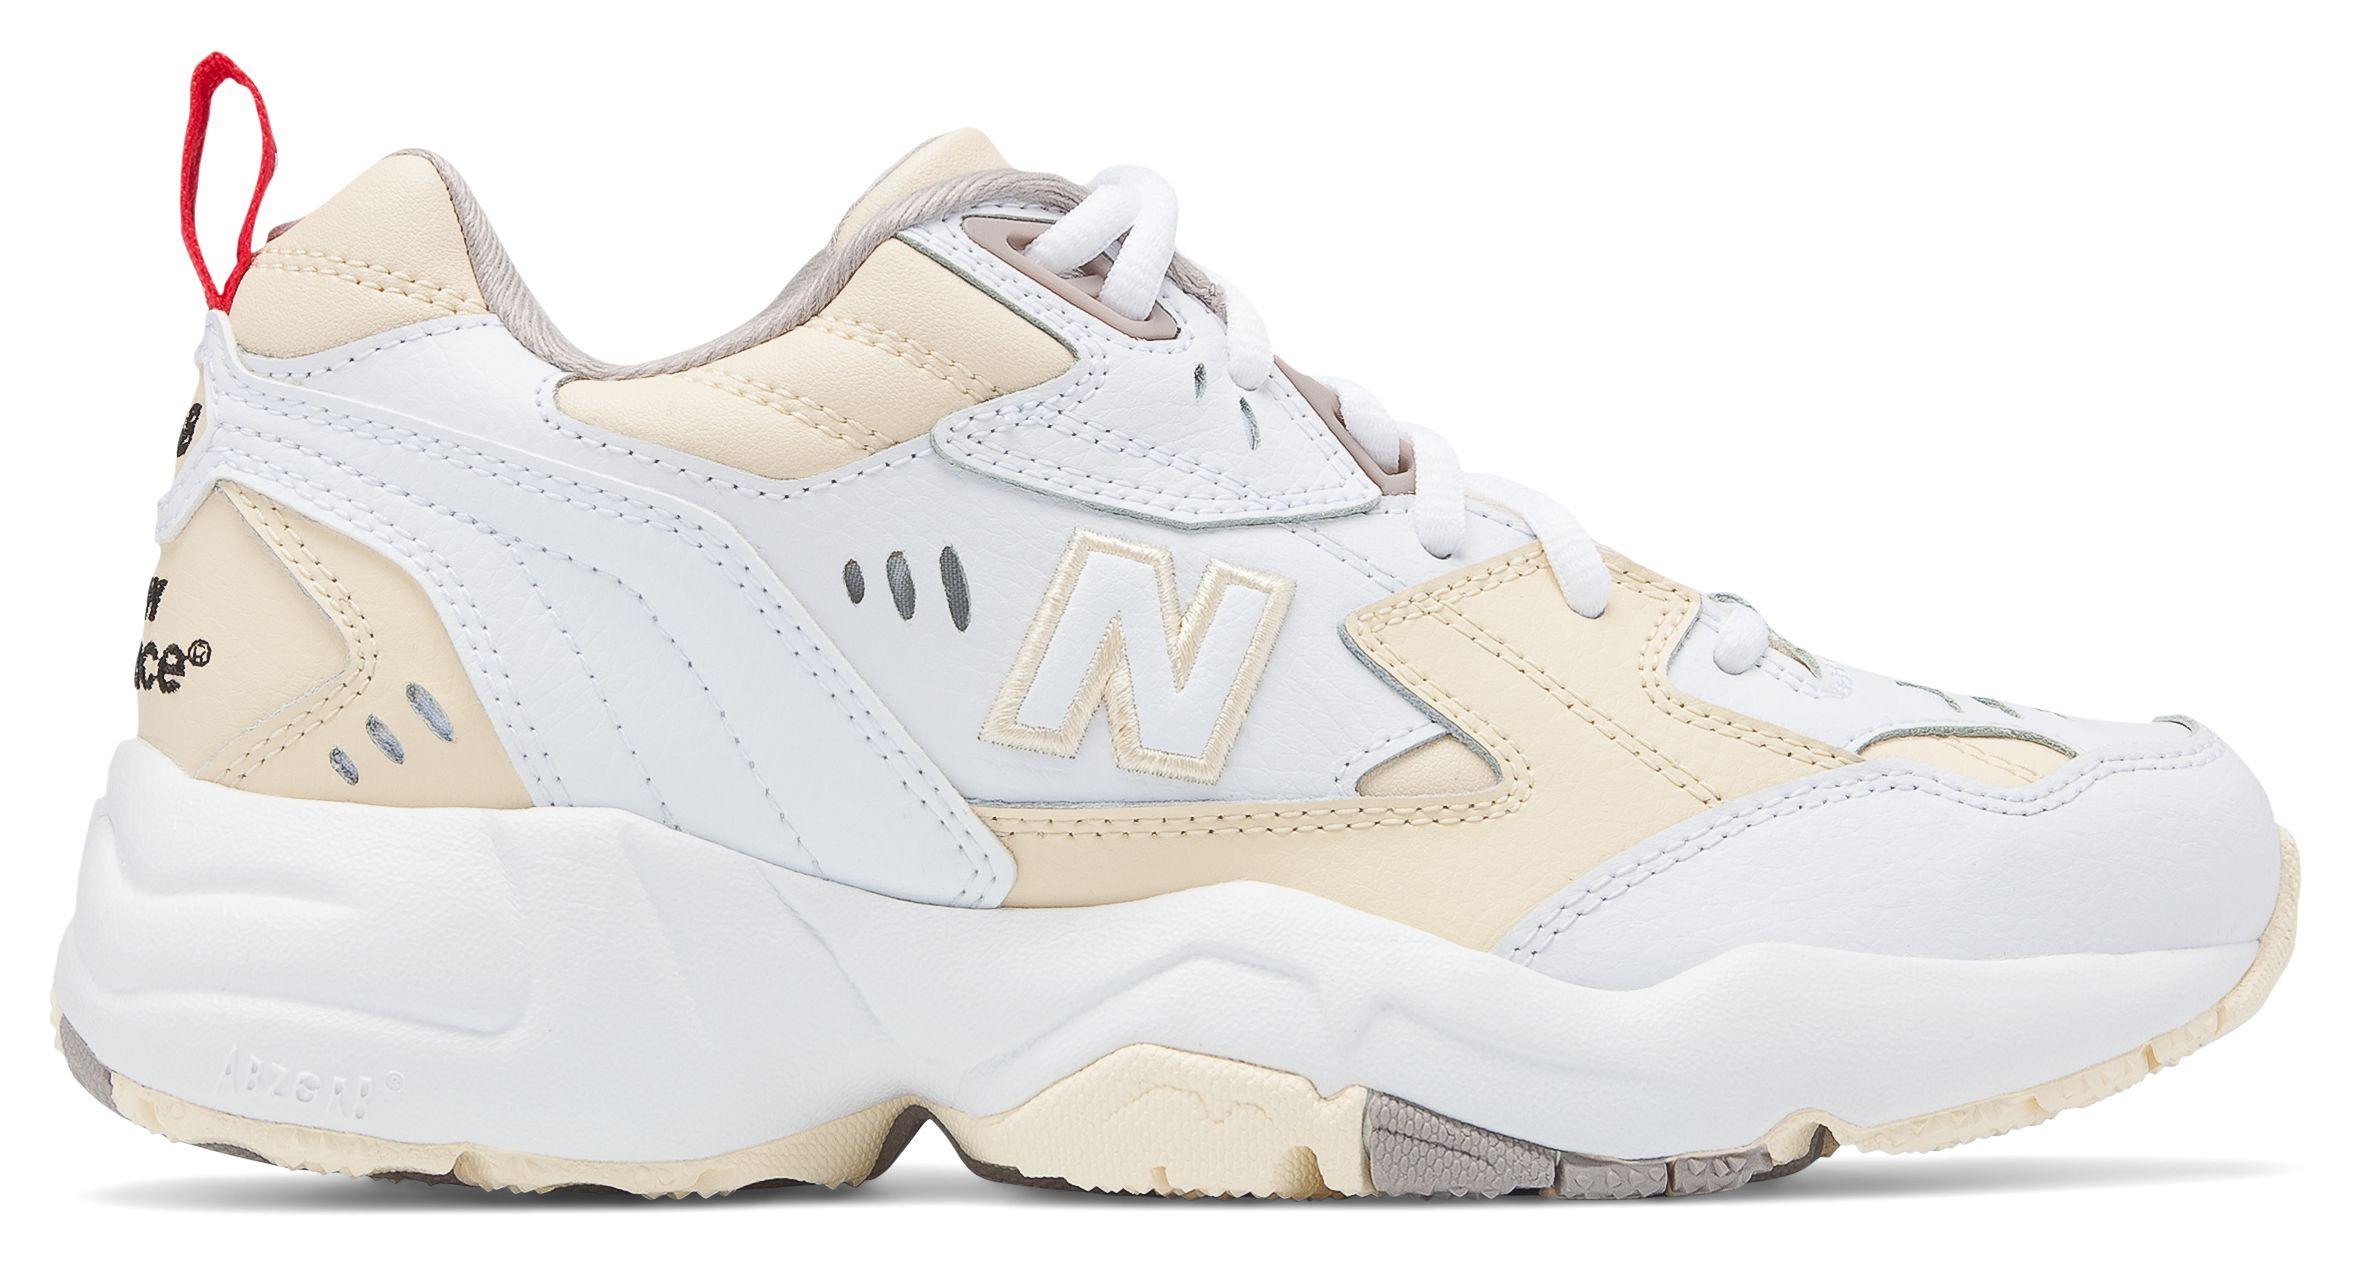 New Balance Leather 608 in Tan/White (White) - Lyst